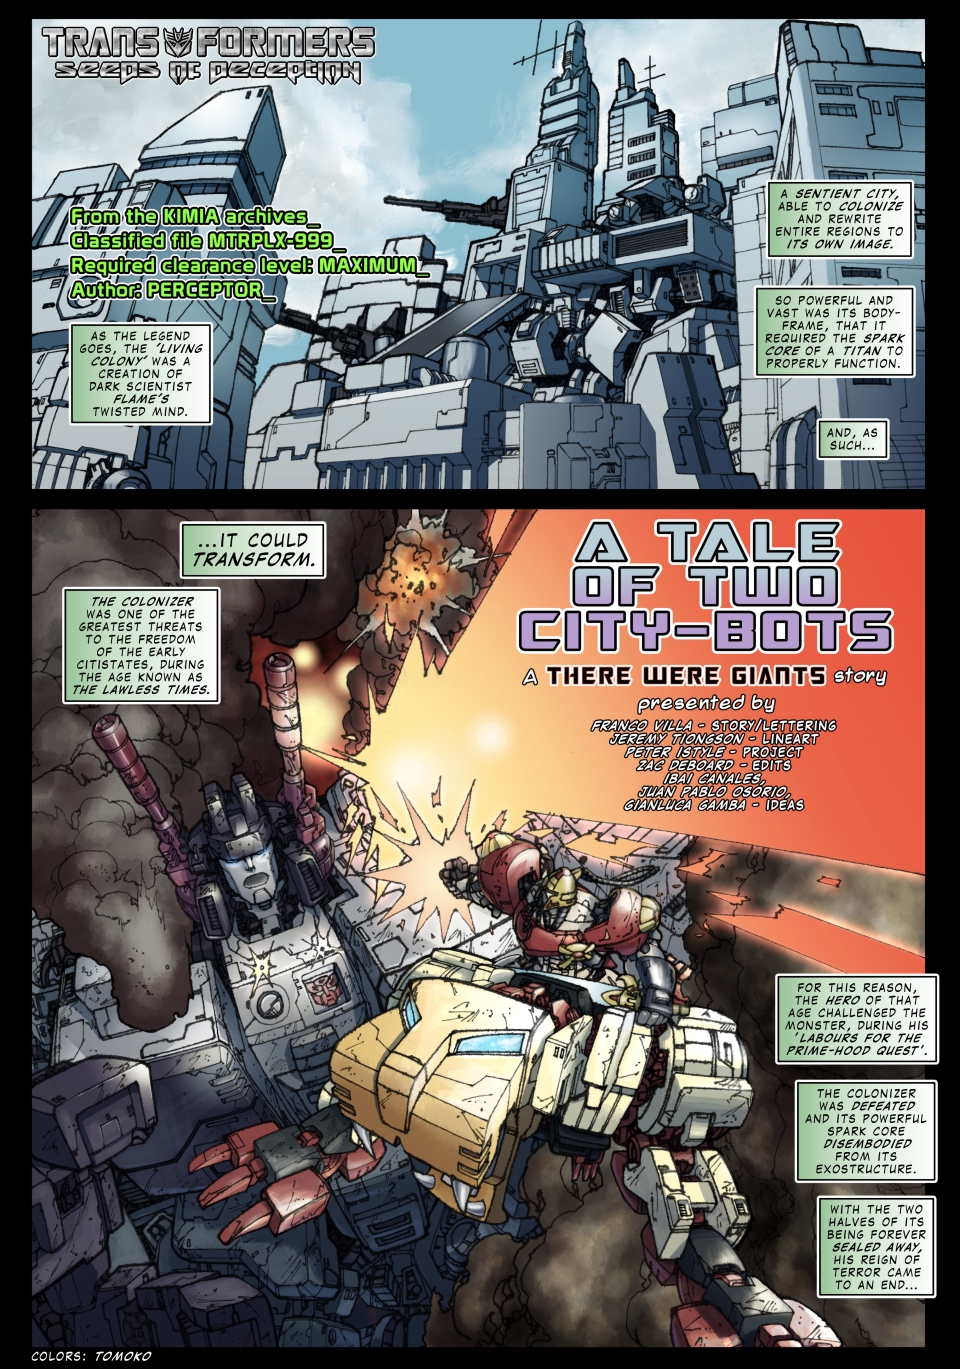 A Tale of Two City-Bots - page 1